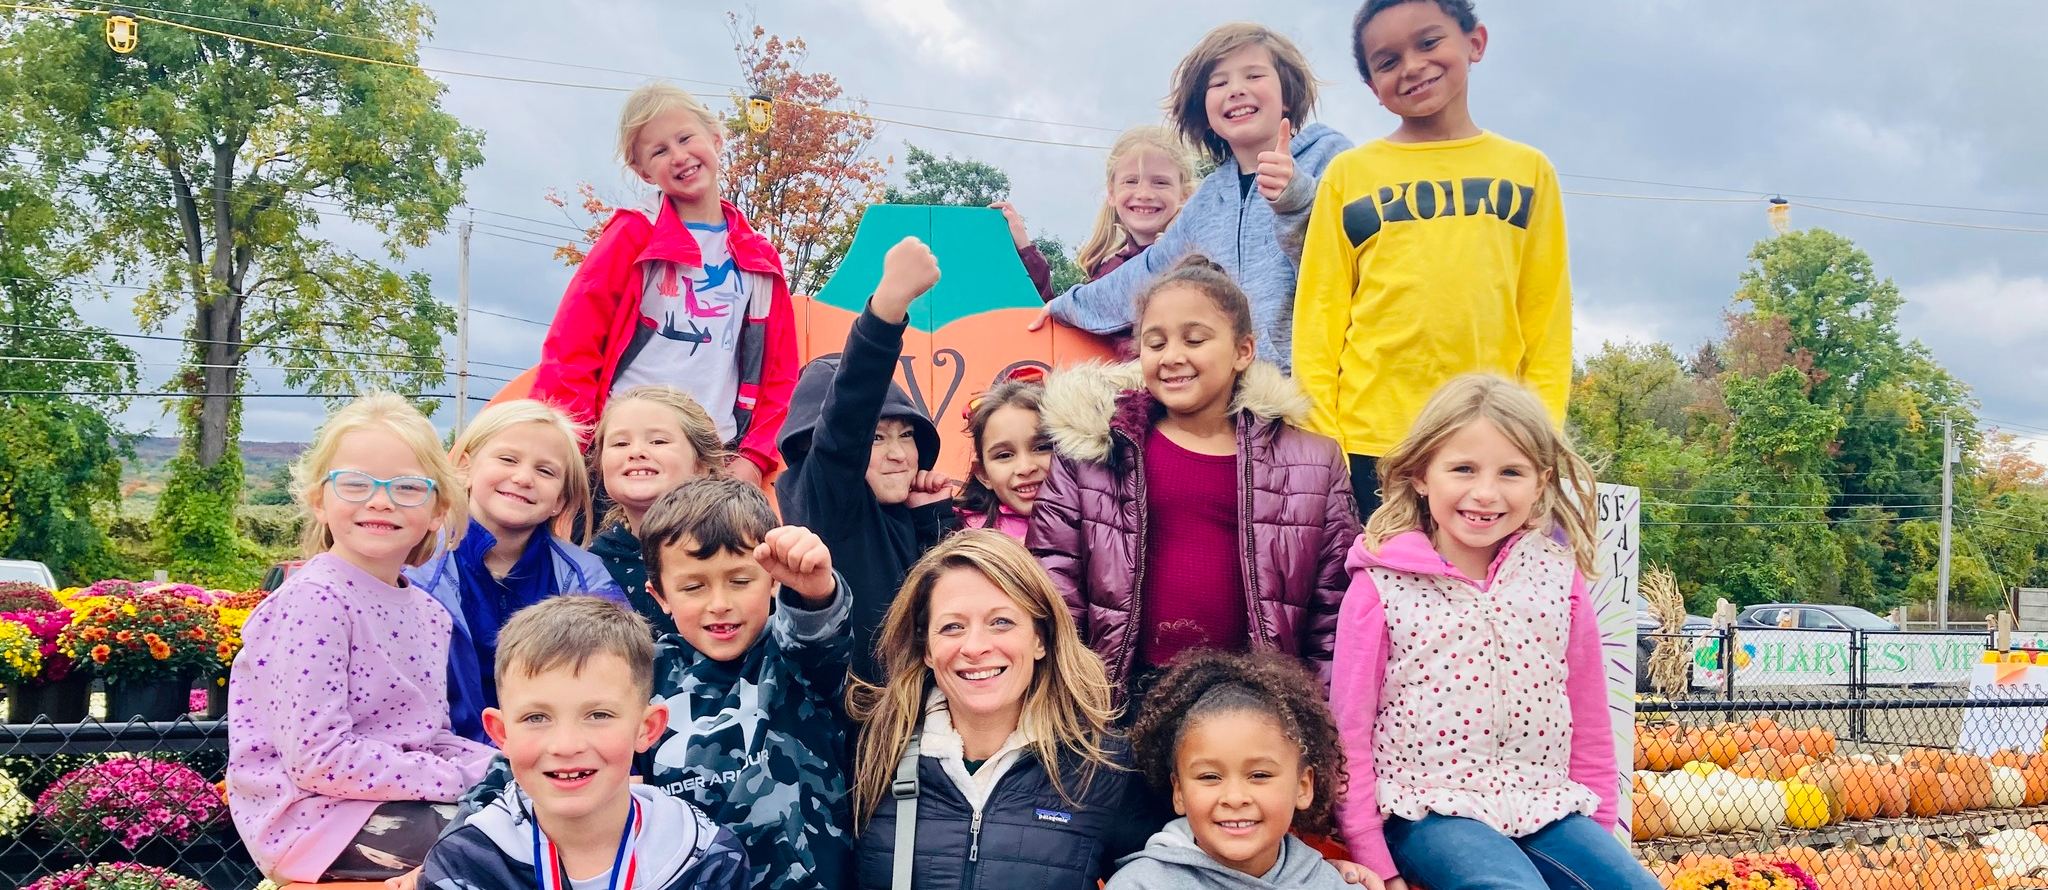 group photo of an elementary class with their teacher posing amongst mums, pumpkins, and other fall decor outside